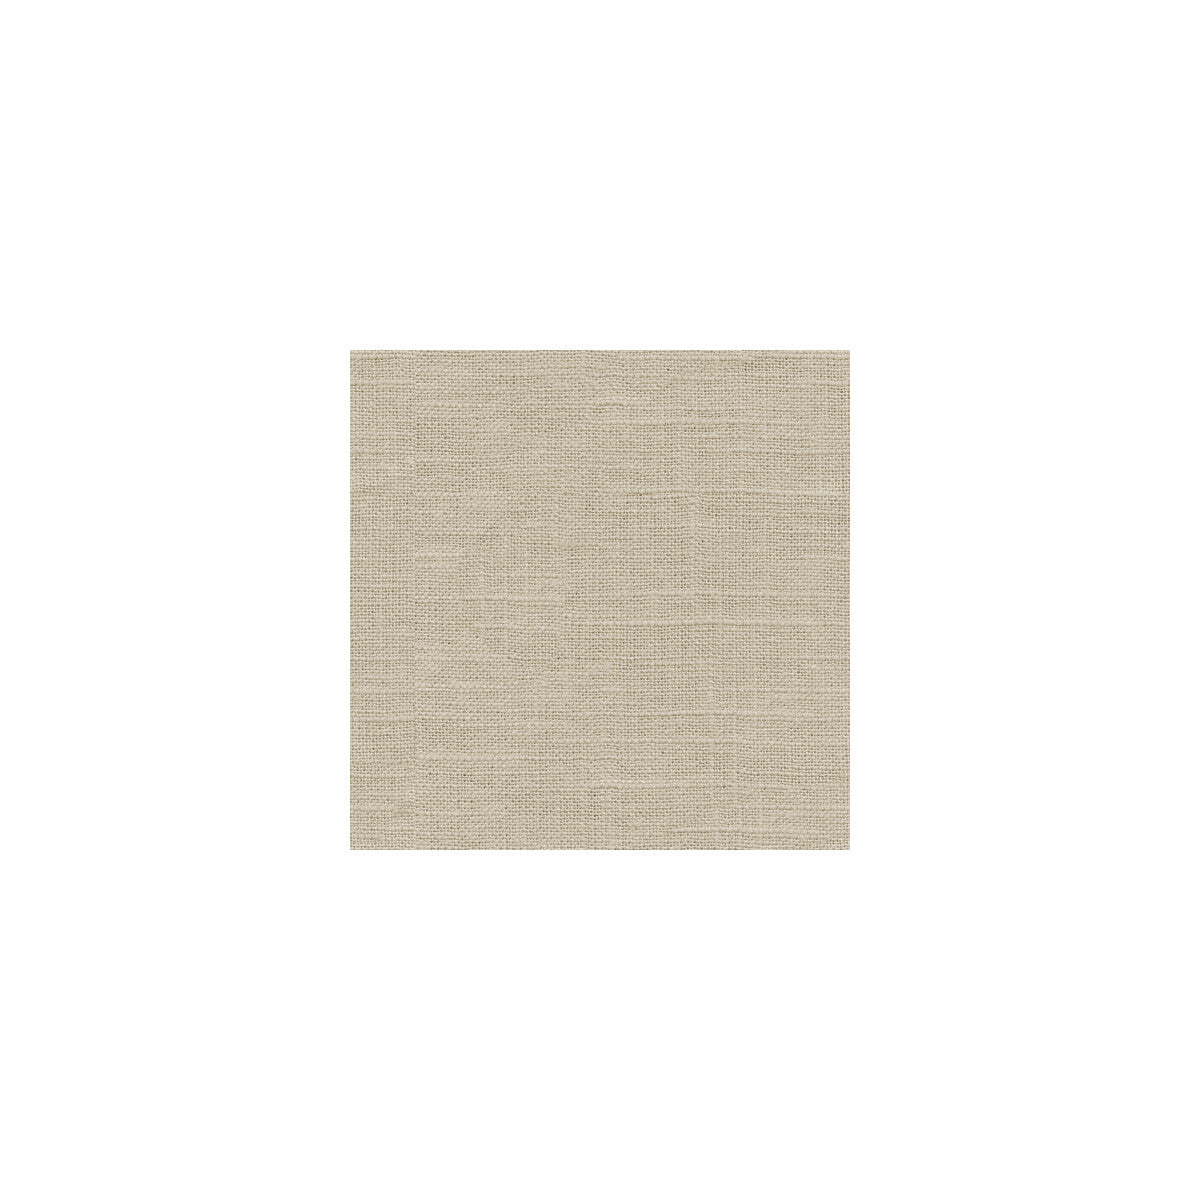 Barnegat fabric in natural color - pattern 24573.106.0 - by Kravet Basics in the Perfect Plains collection